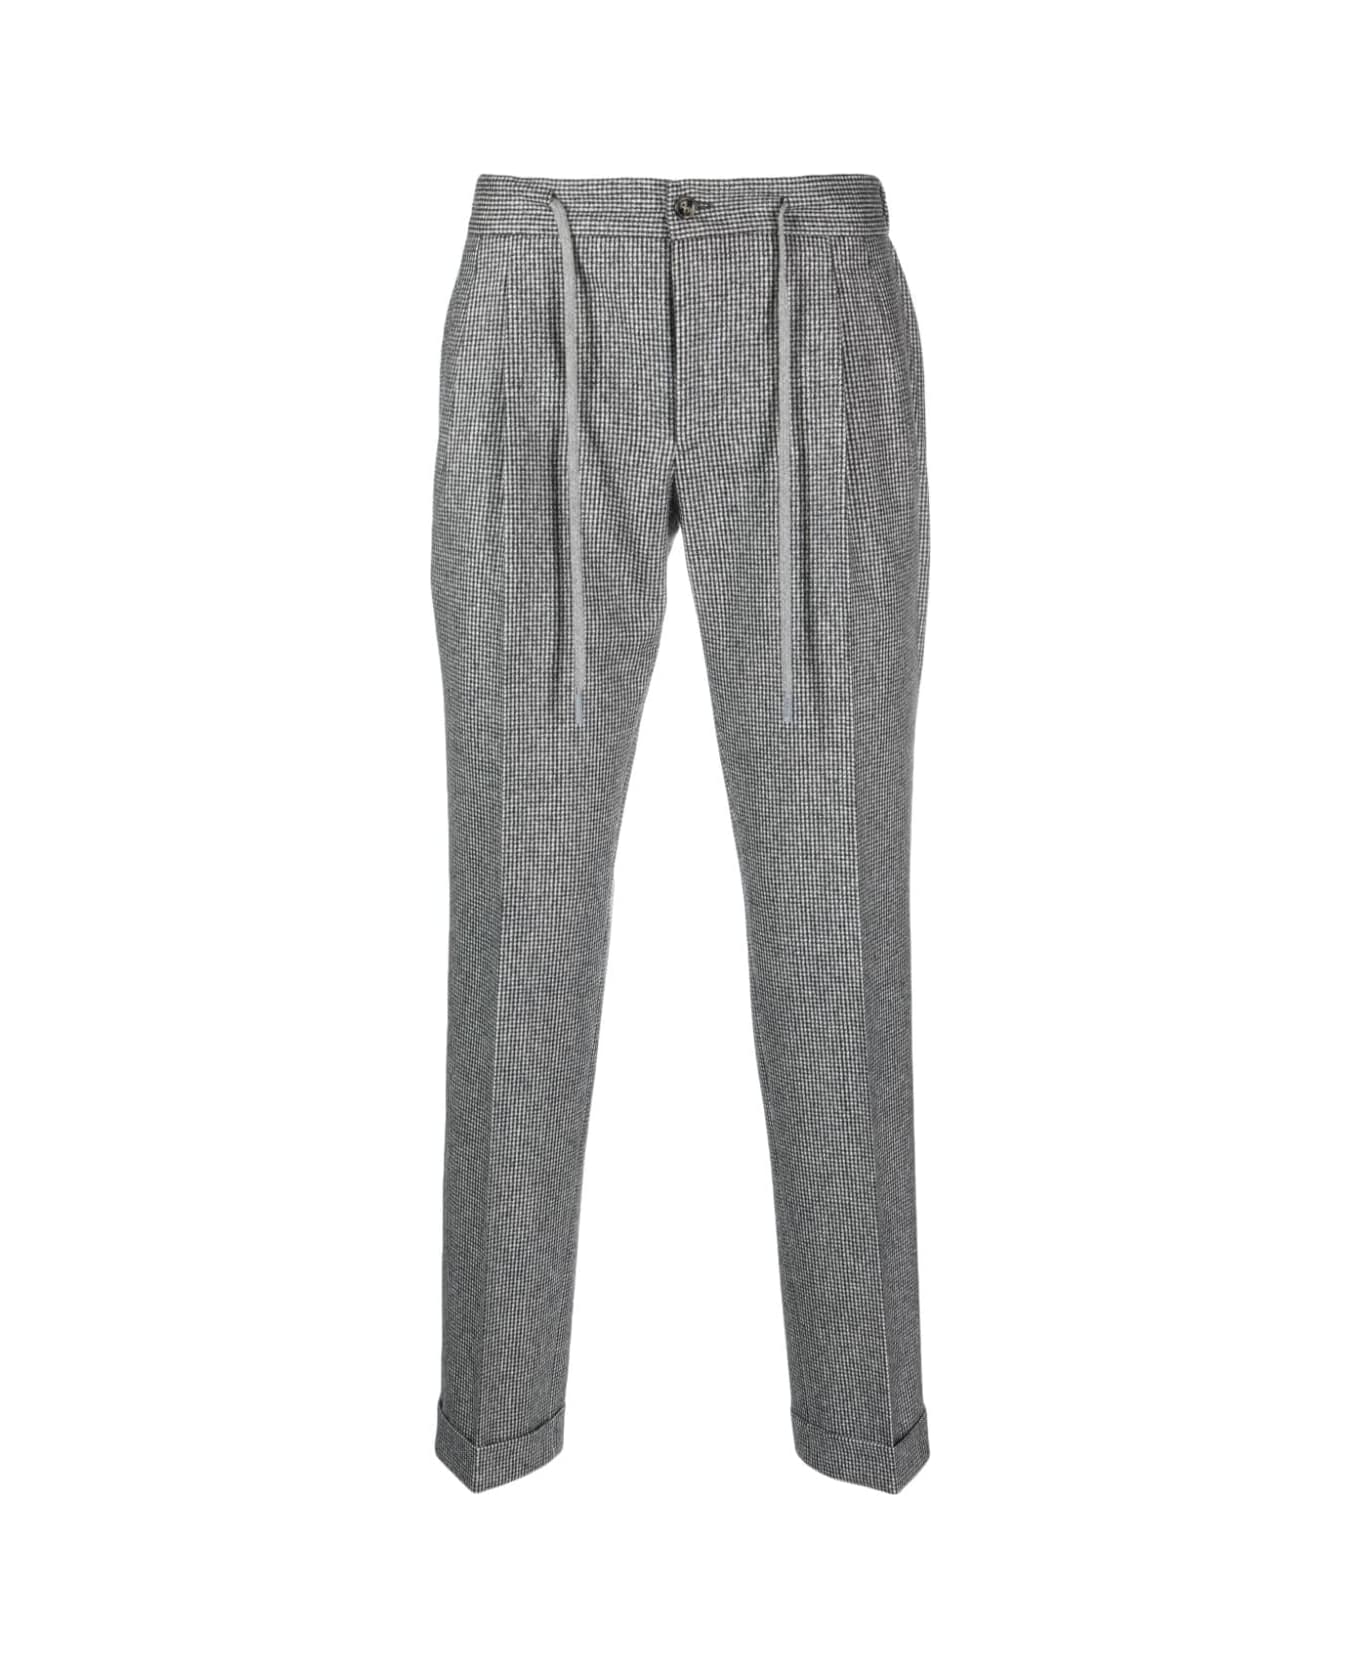 Barba Napoli Roma Coulisse Trousers - Grey